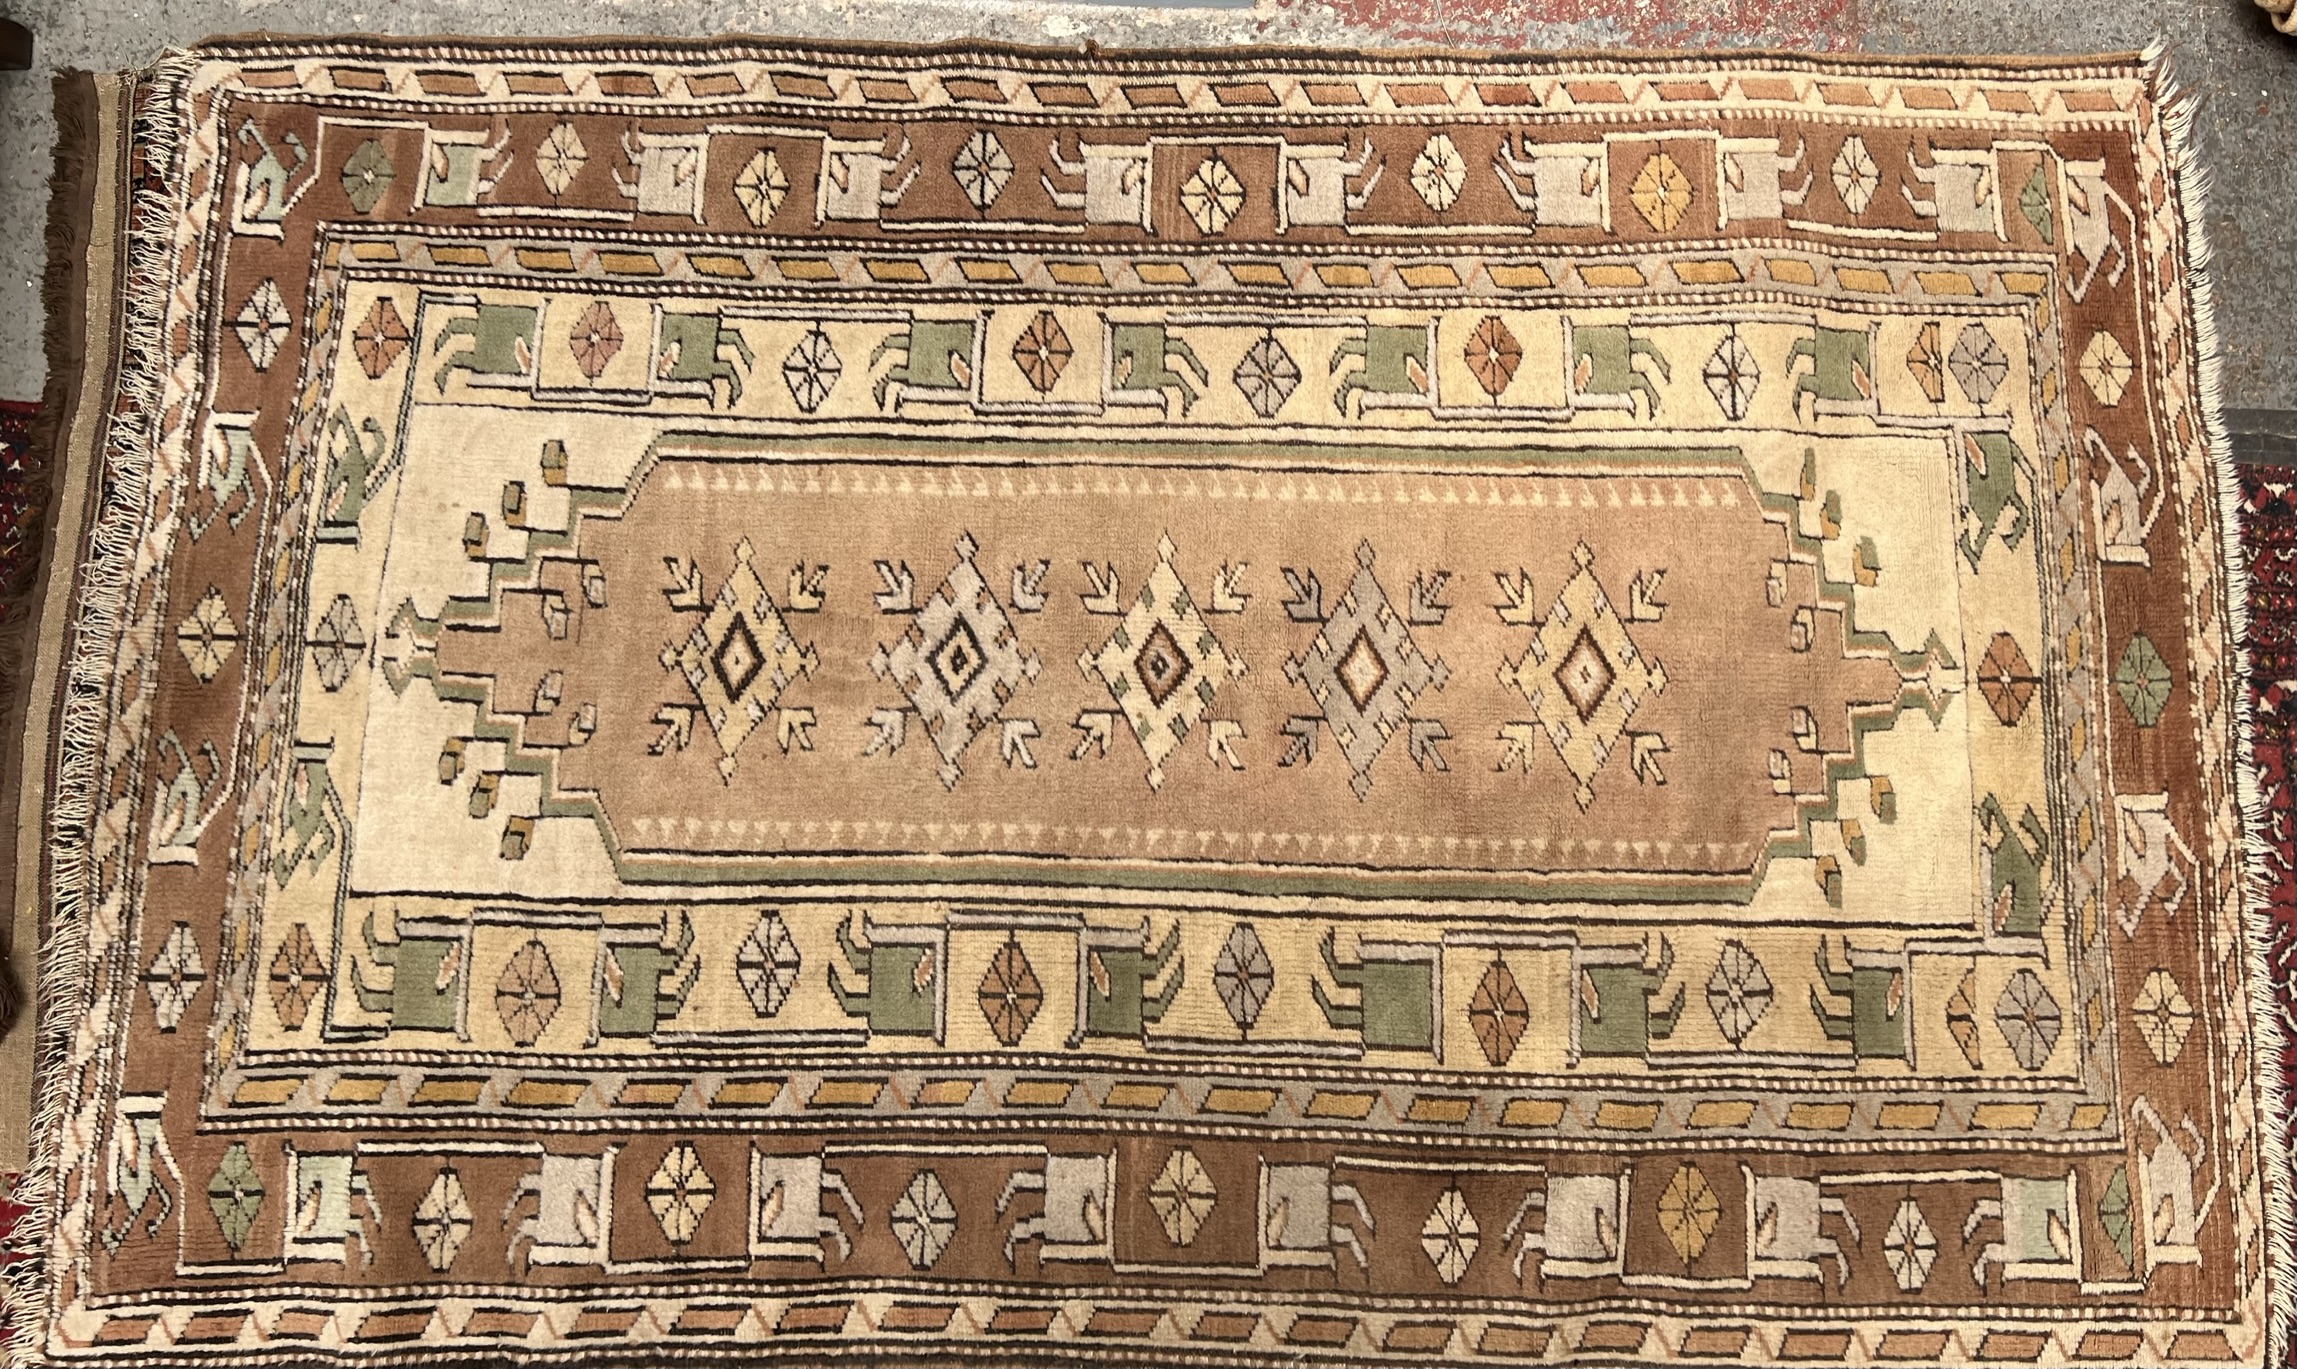 A rug with a cream ground, with central medallions and numerous guard stripes,